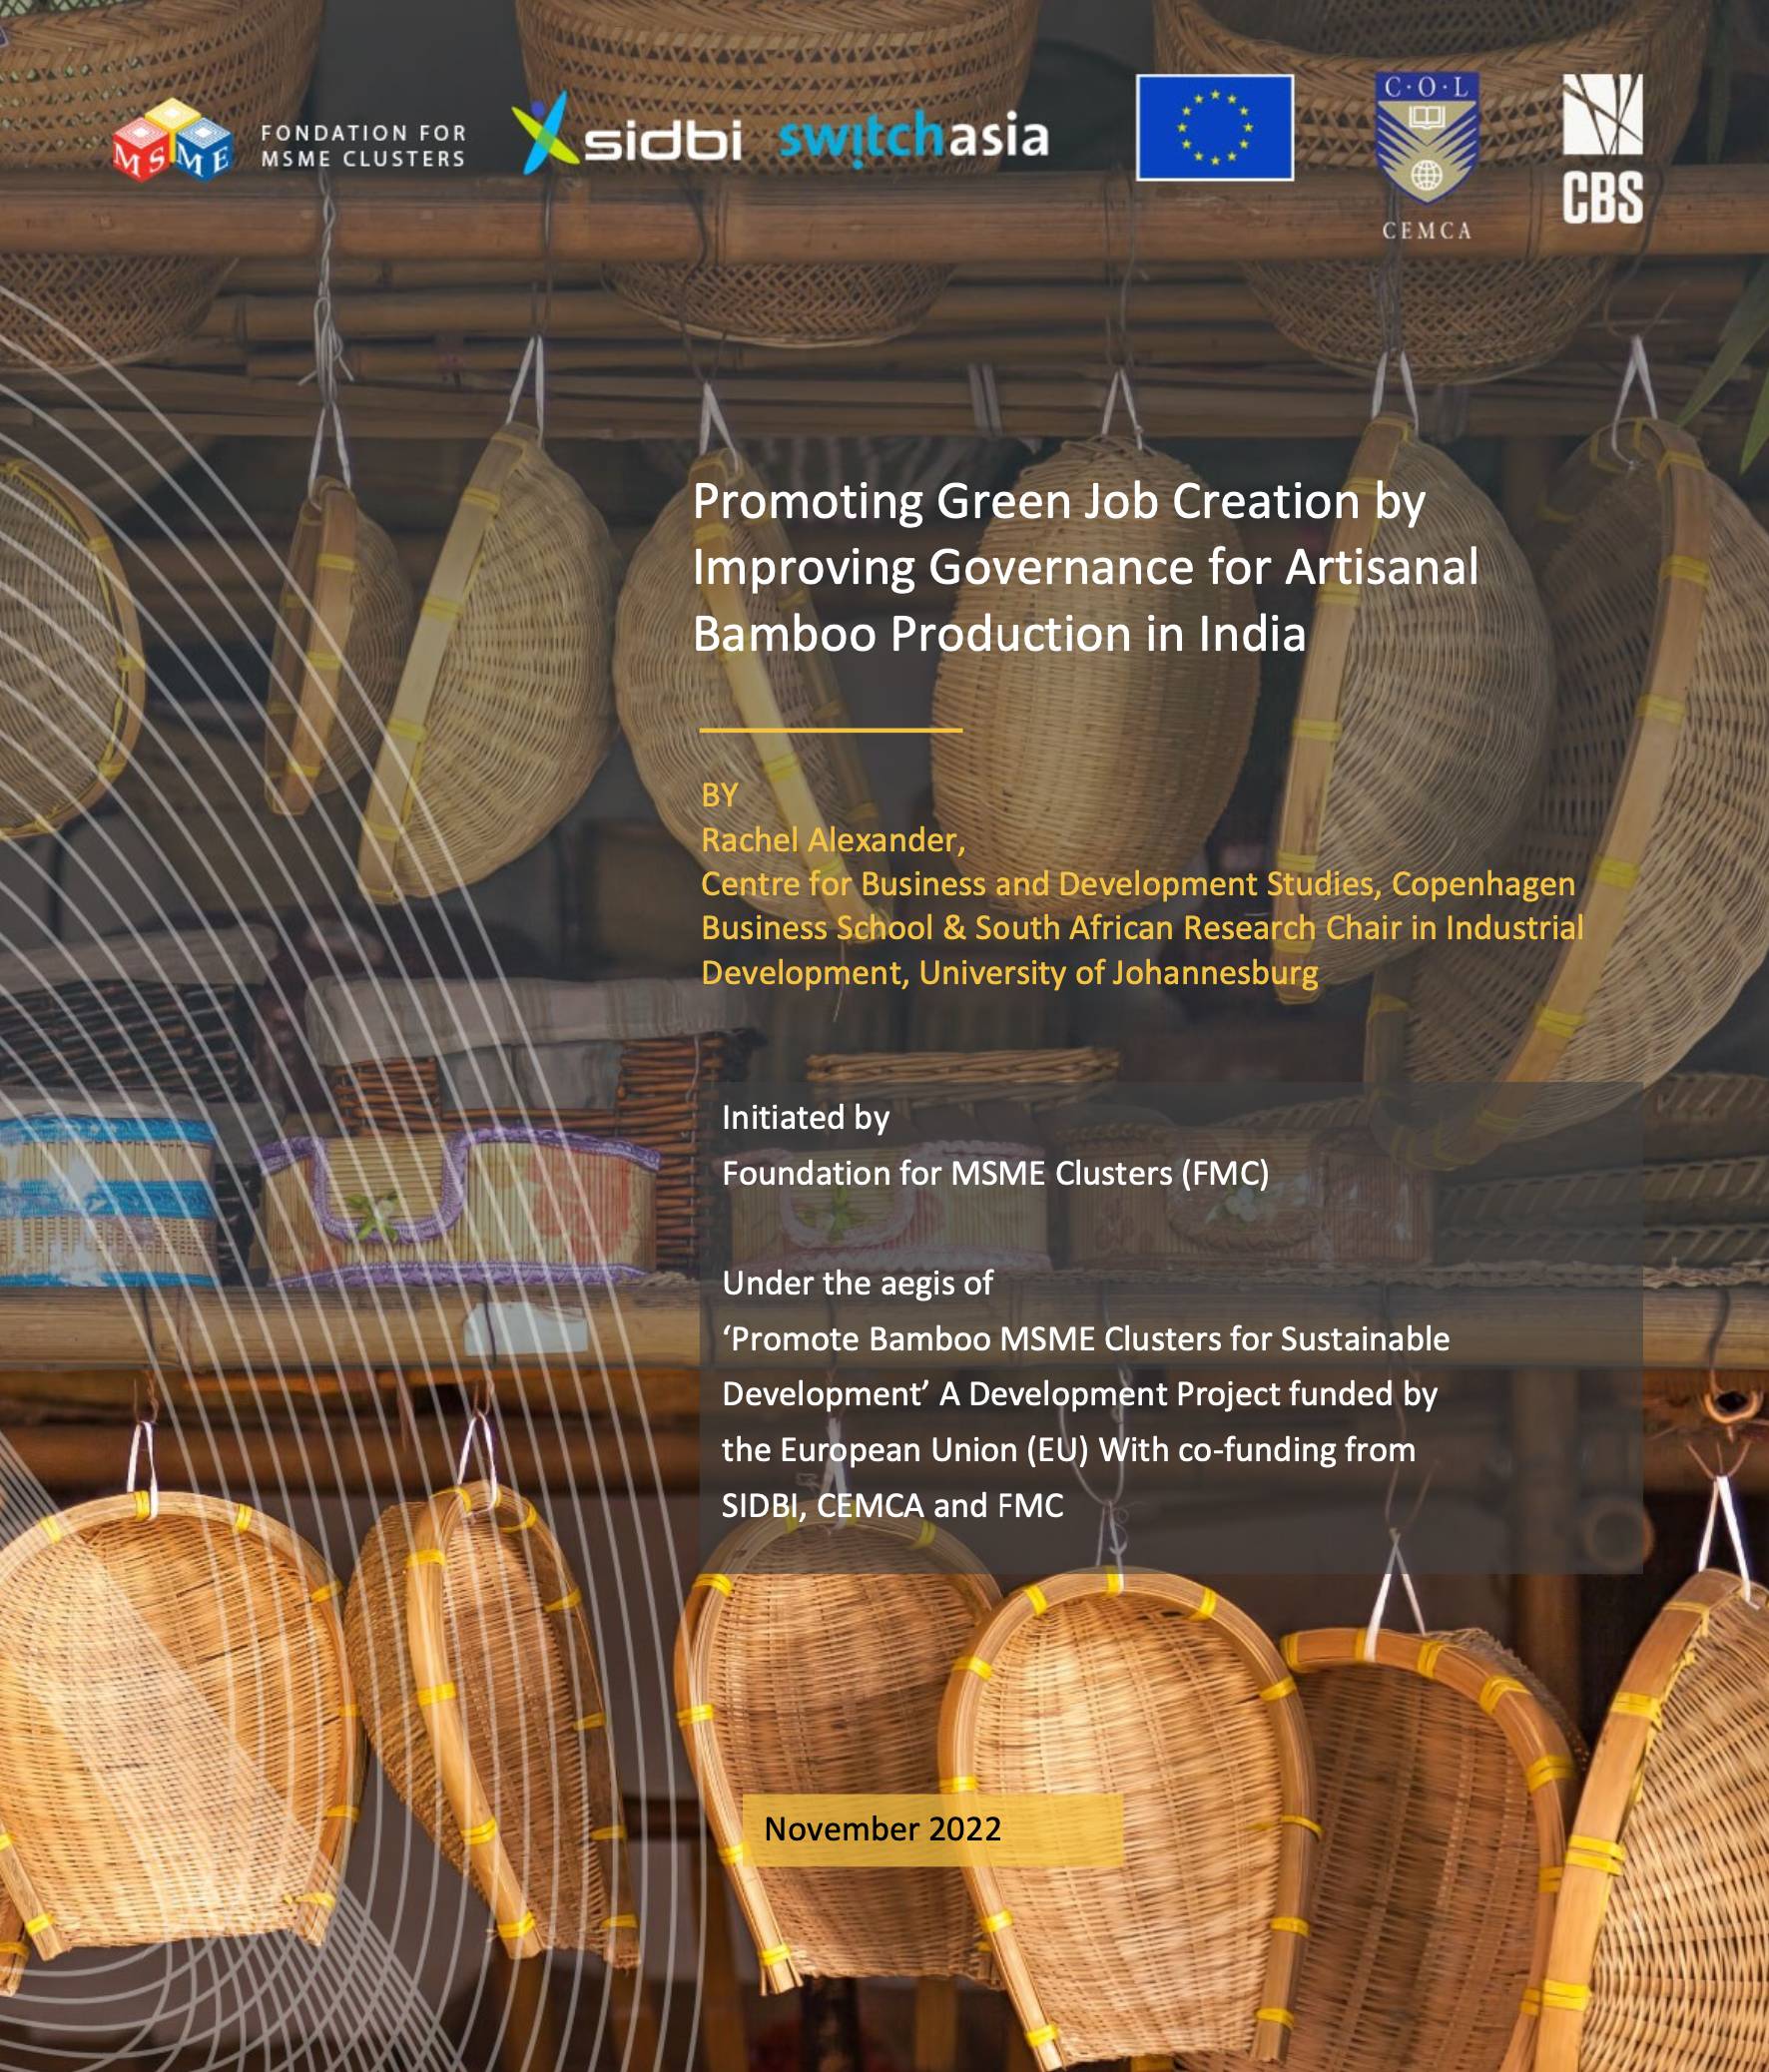 Promoting Green Job Creation by Improving Governance for Artisanal Bamboo Production in India